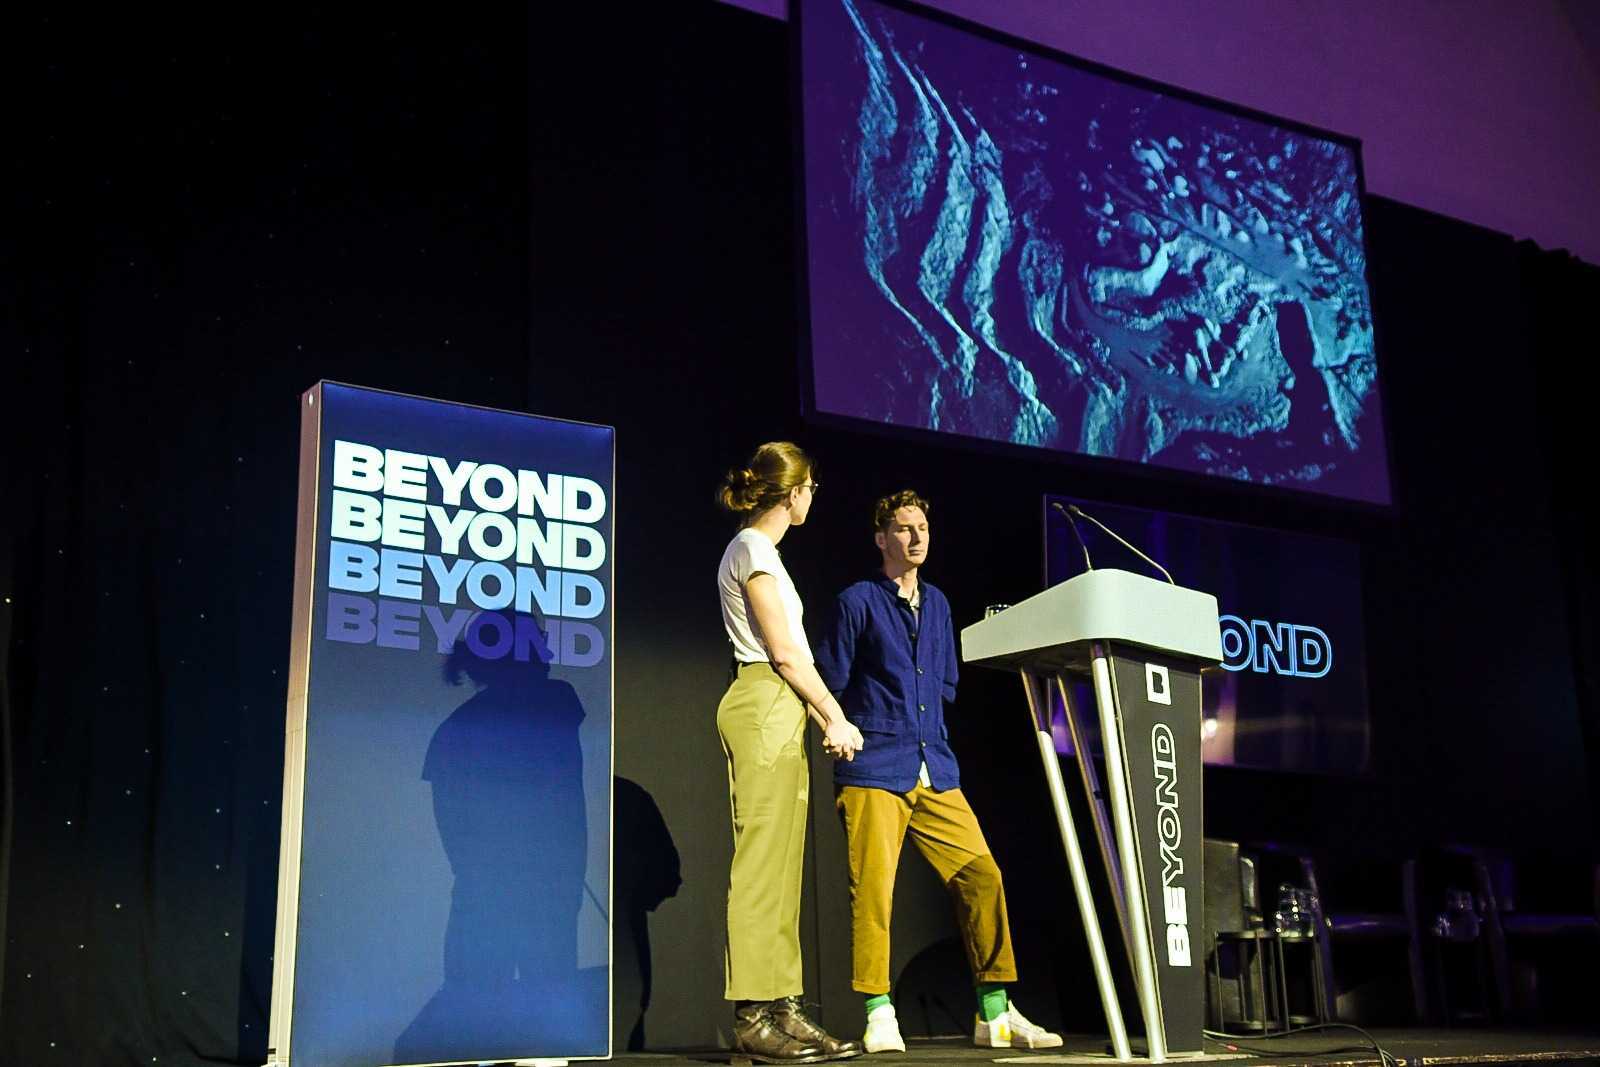 two speakers on stage at Beyond conference. A woman wearing green trousers and a white top is looking at a man wearing yellow trousers and a navy shirt. They are stood behid a speaker podium with a large screen above them